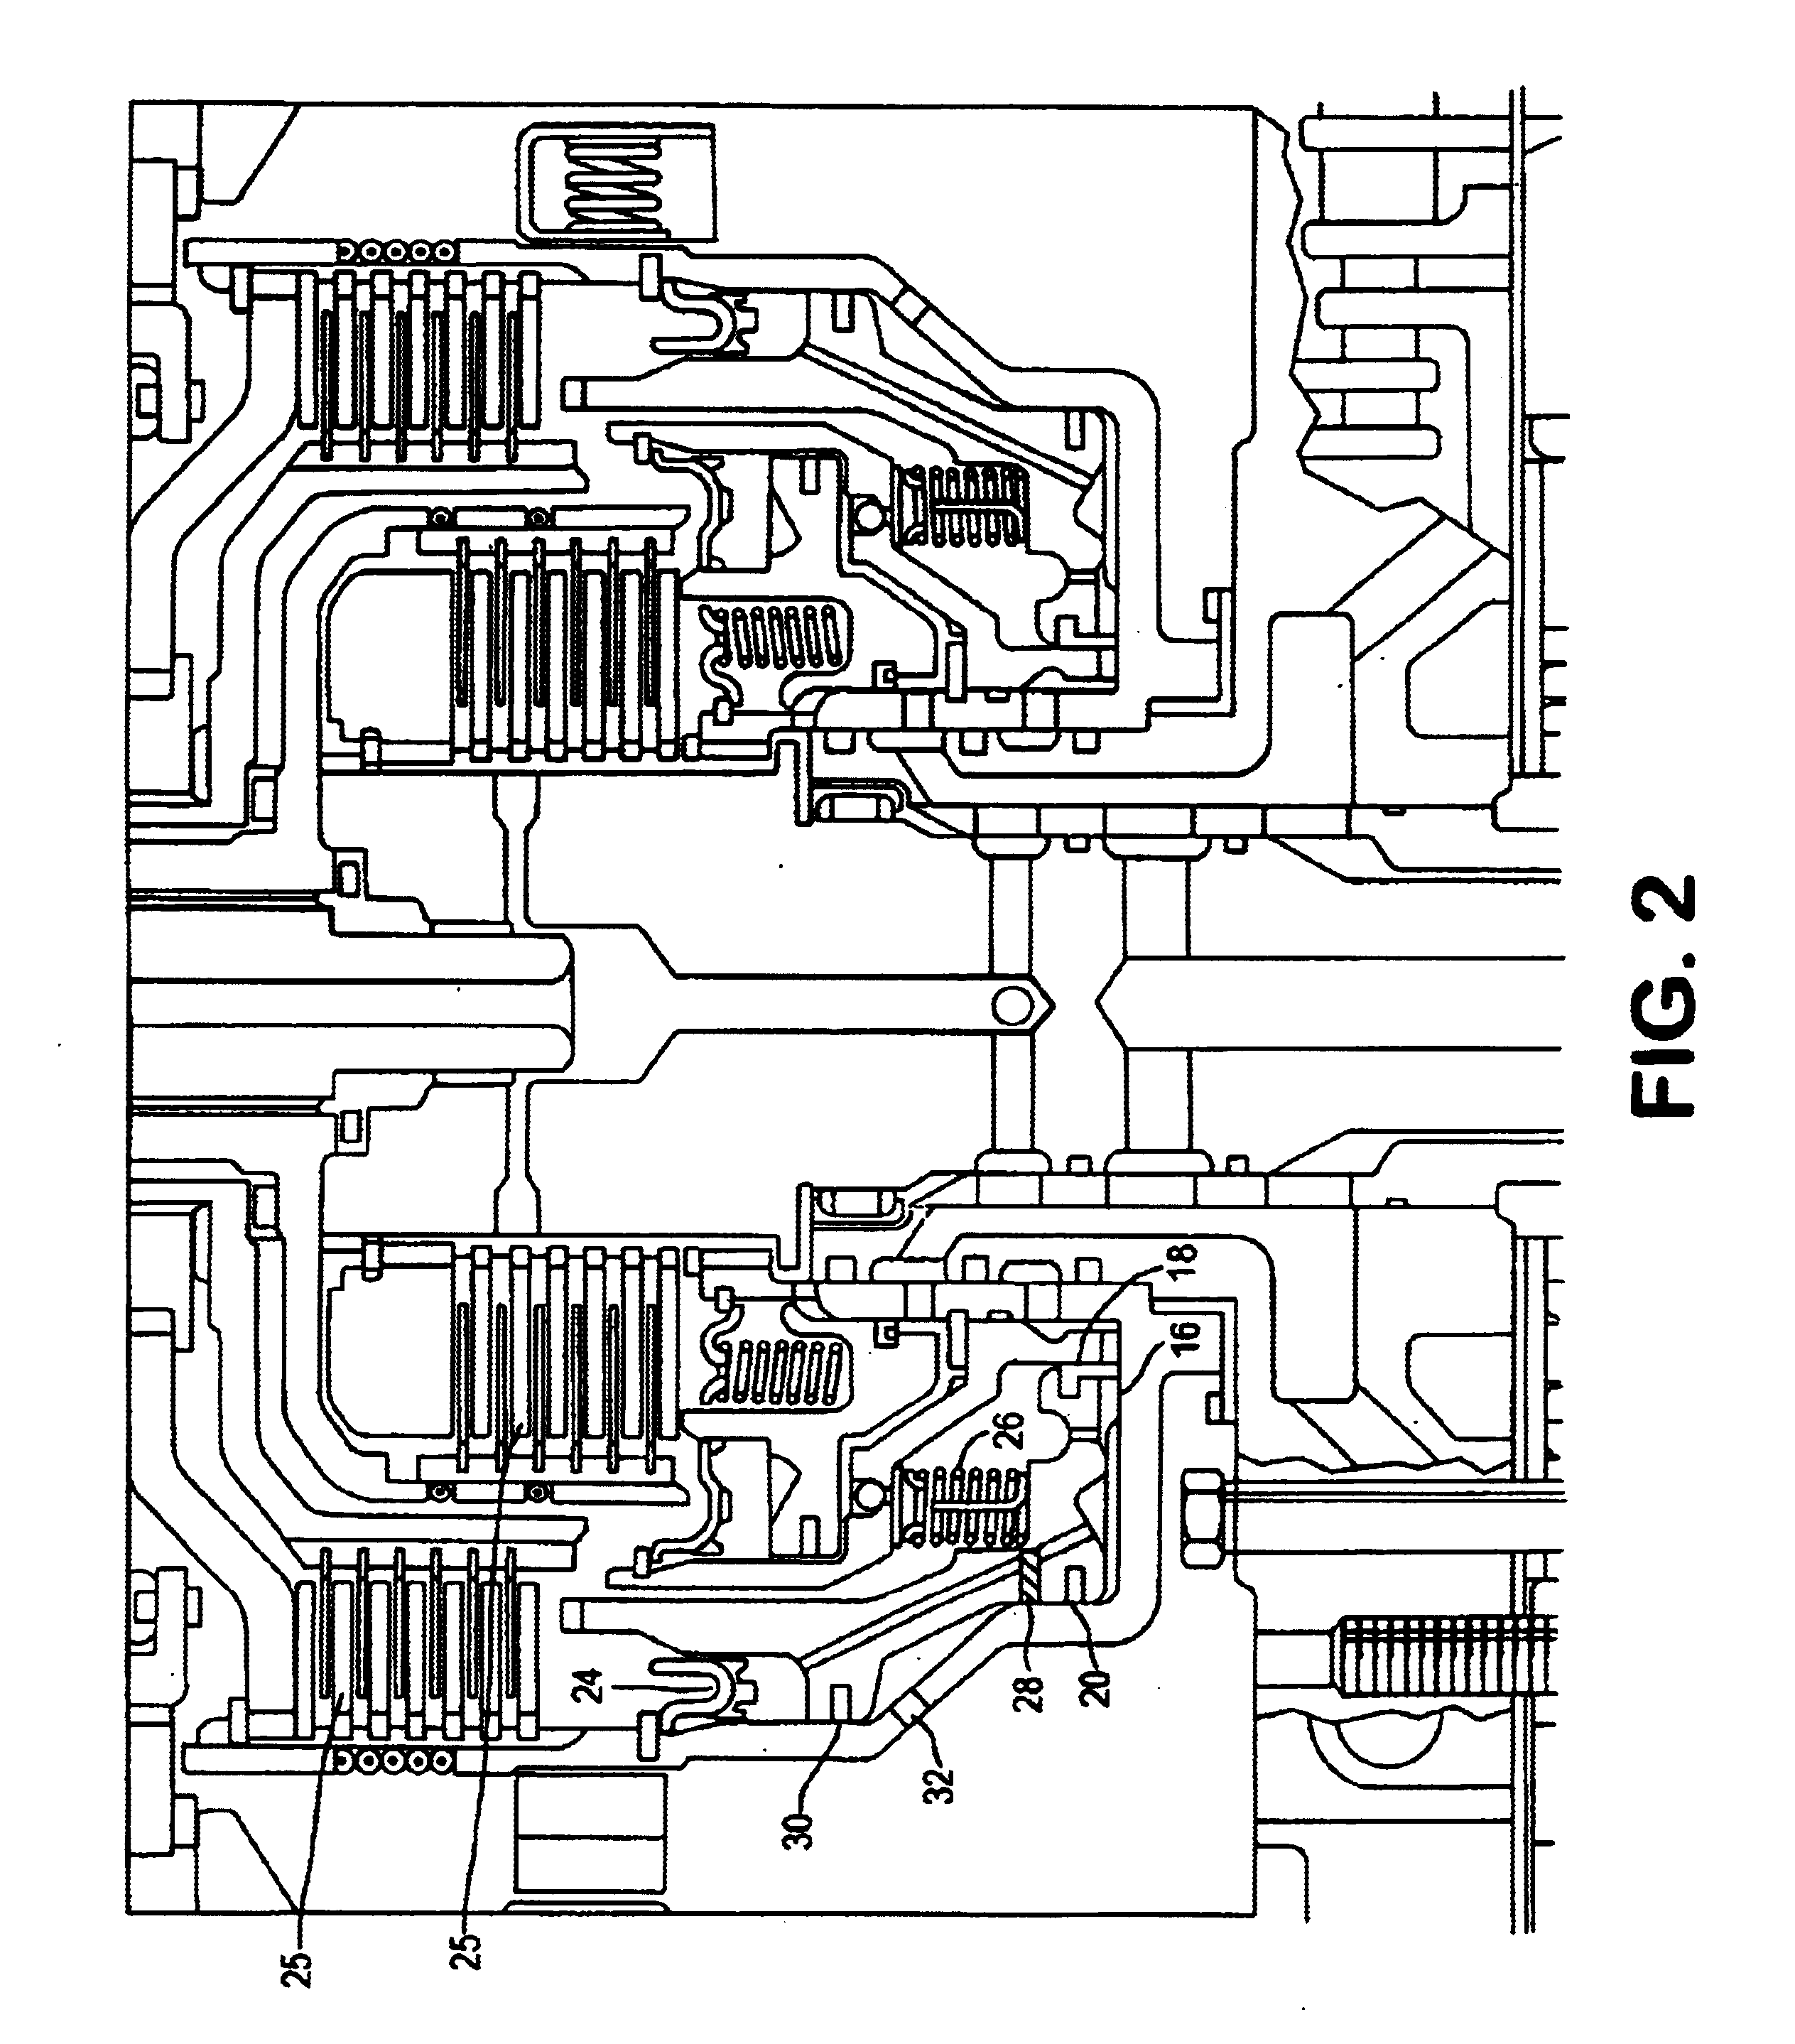 Methods and systems for improving the operation of transmissions for motor vehicles